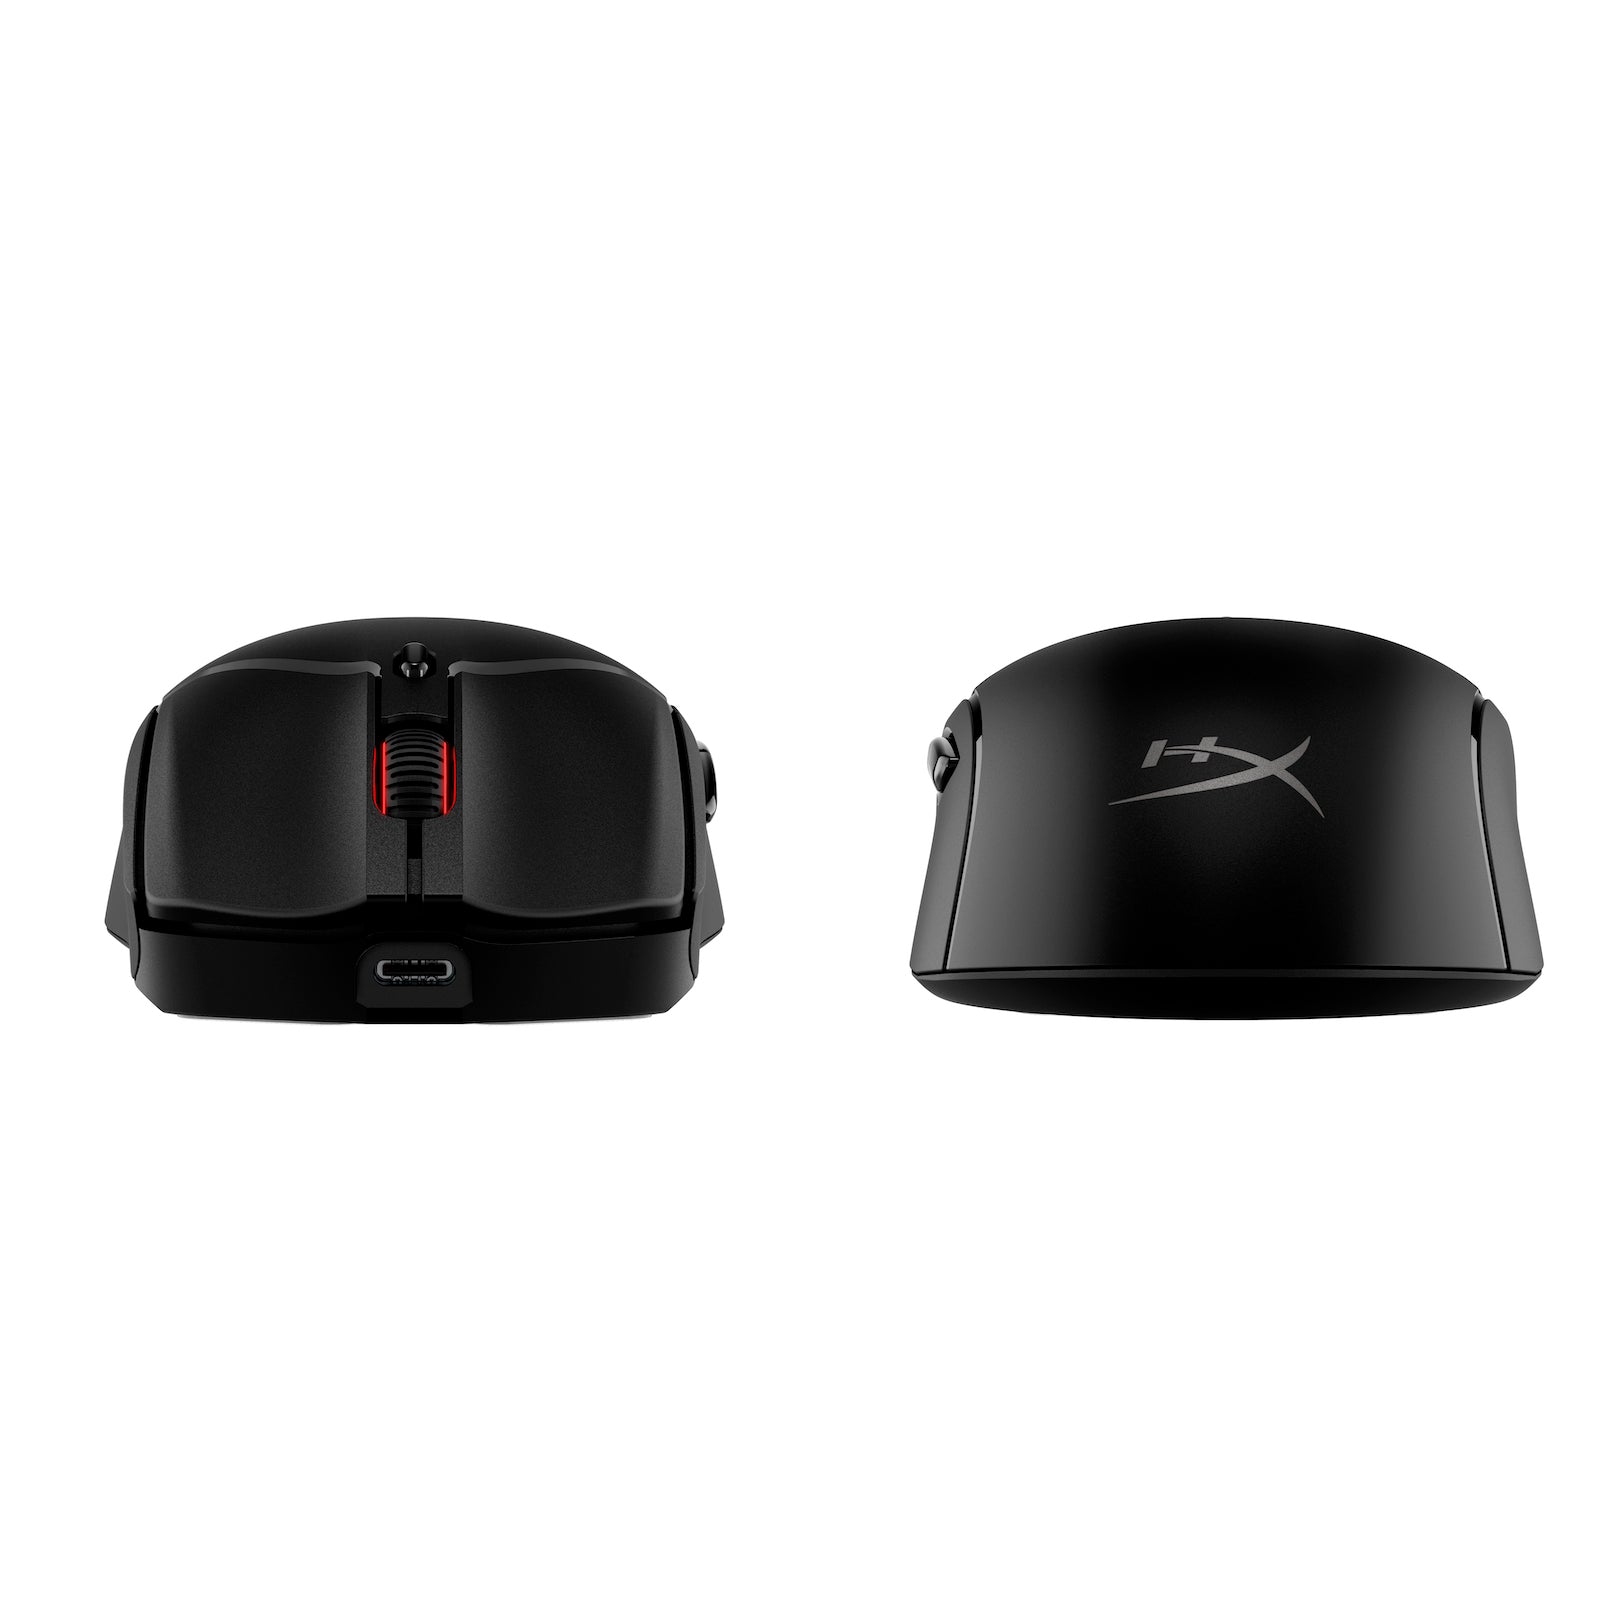 HyperX Pulsefire Haste 2 Wireless Black Gaming Mouse -  front and back view